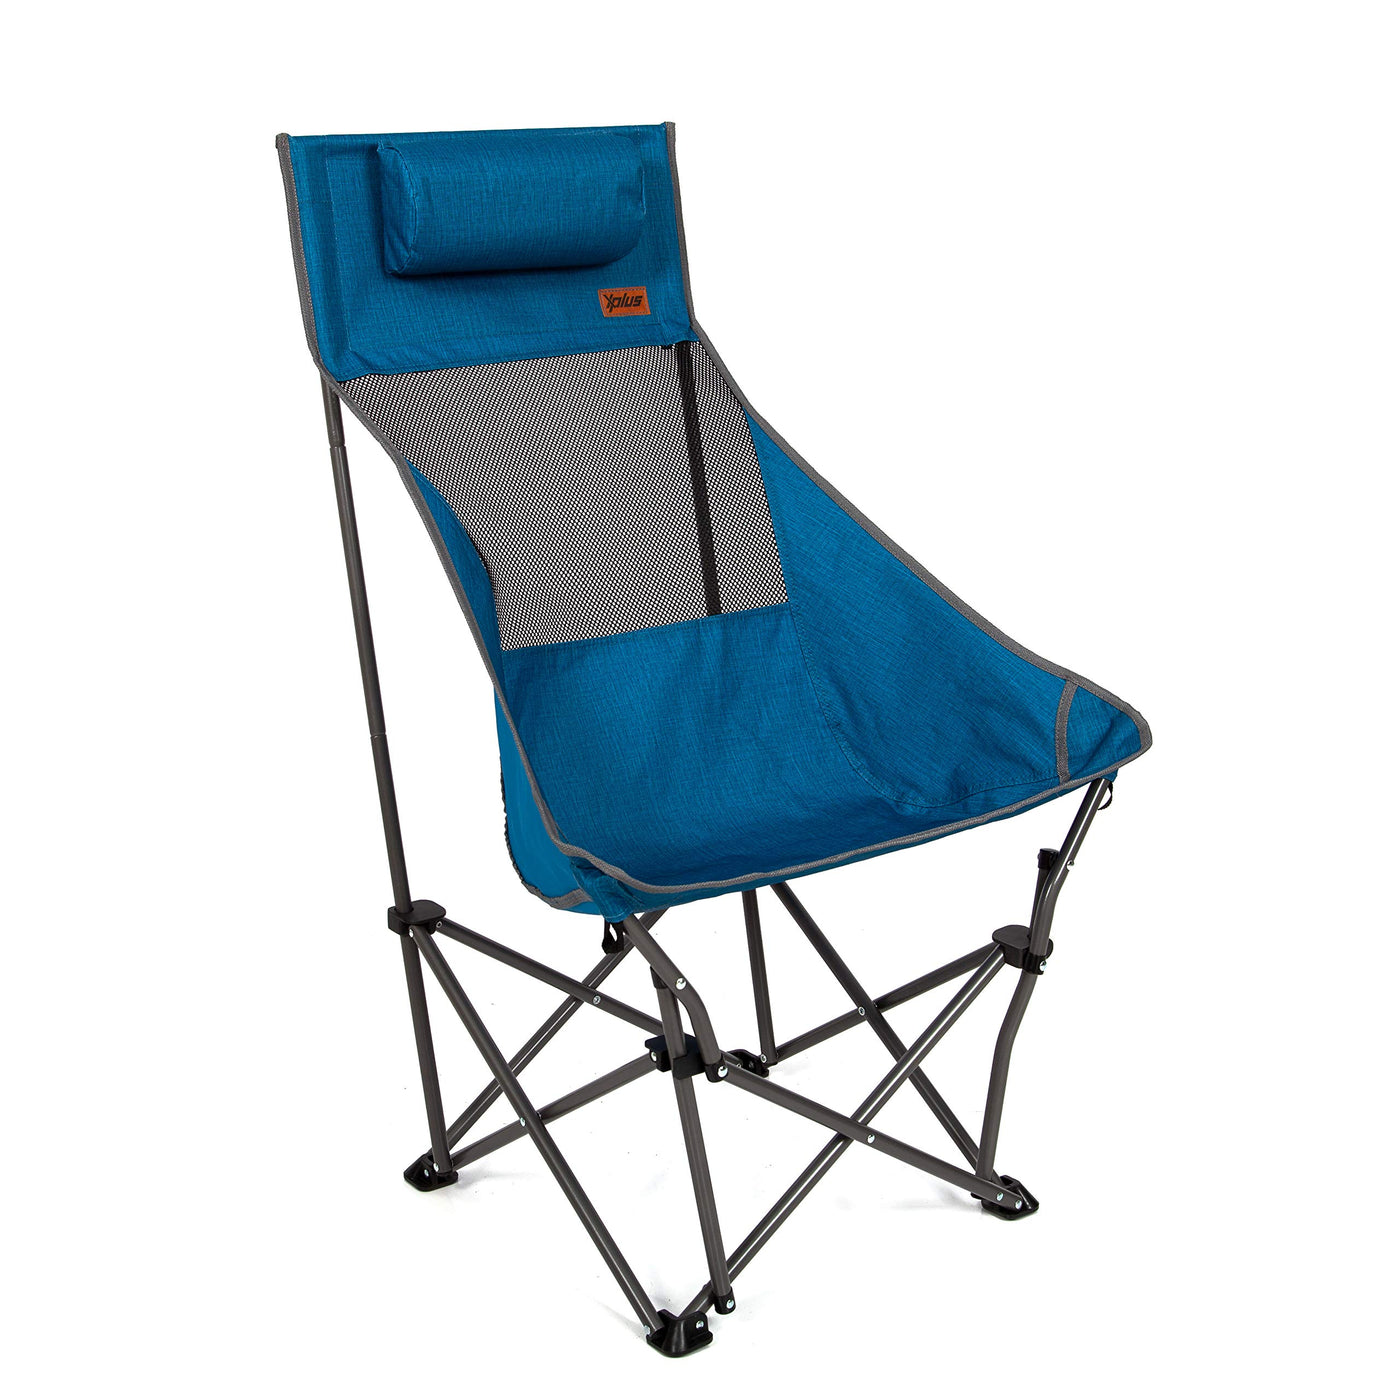 XP High-Back Compact Camping Chair